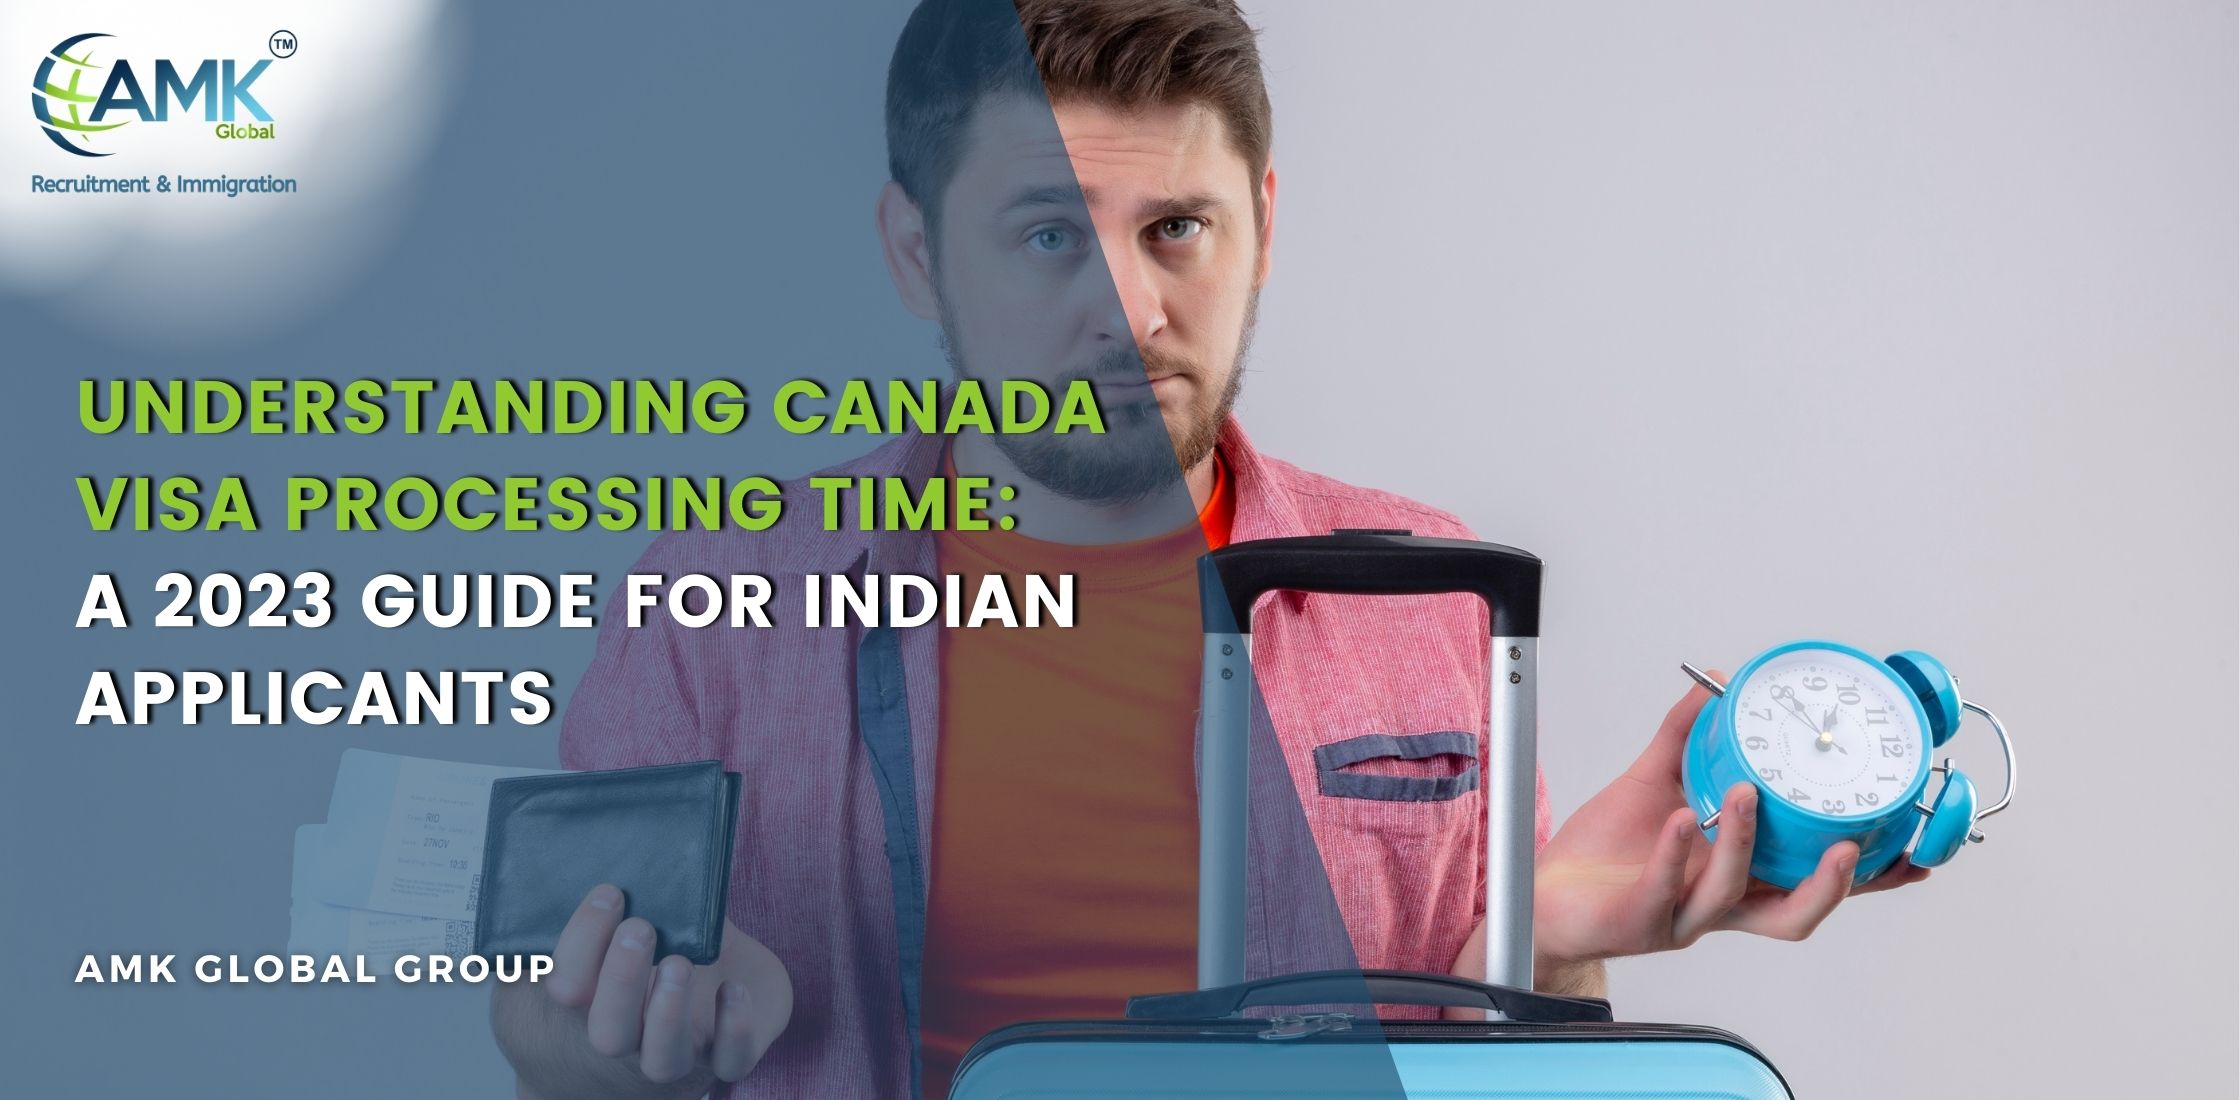 Understanding Canada Visa Processing Time A 2023 Guide for Indian